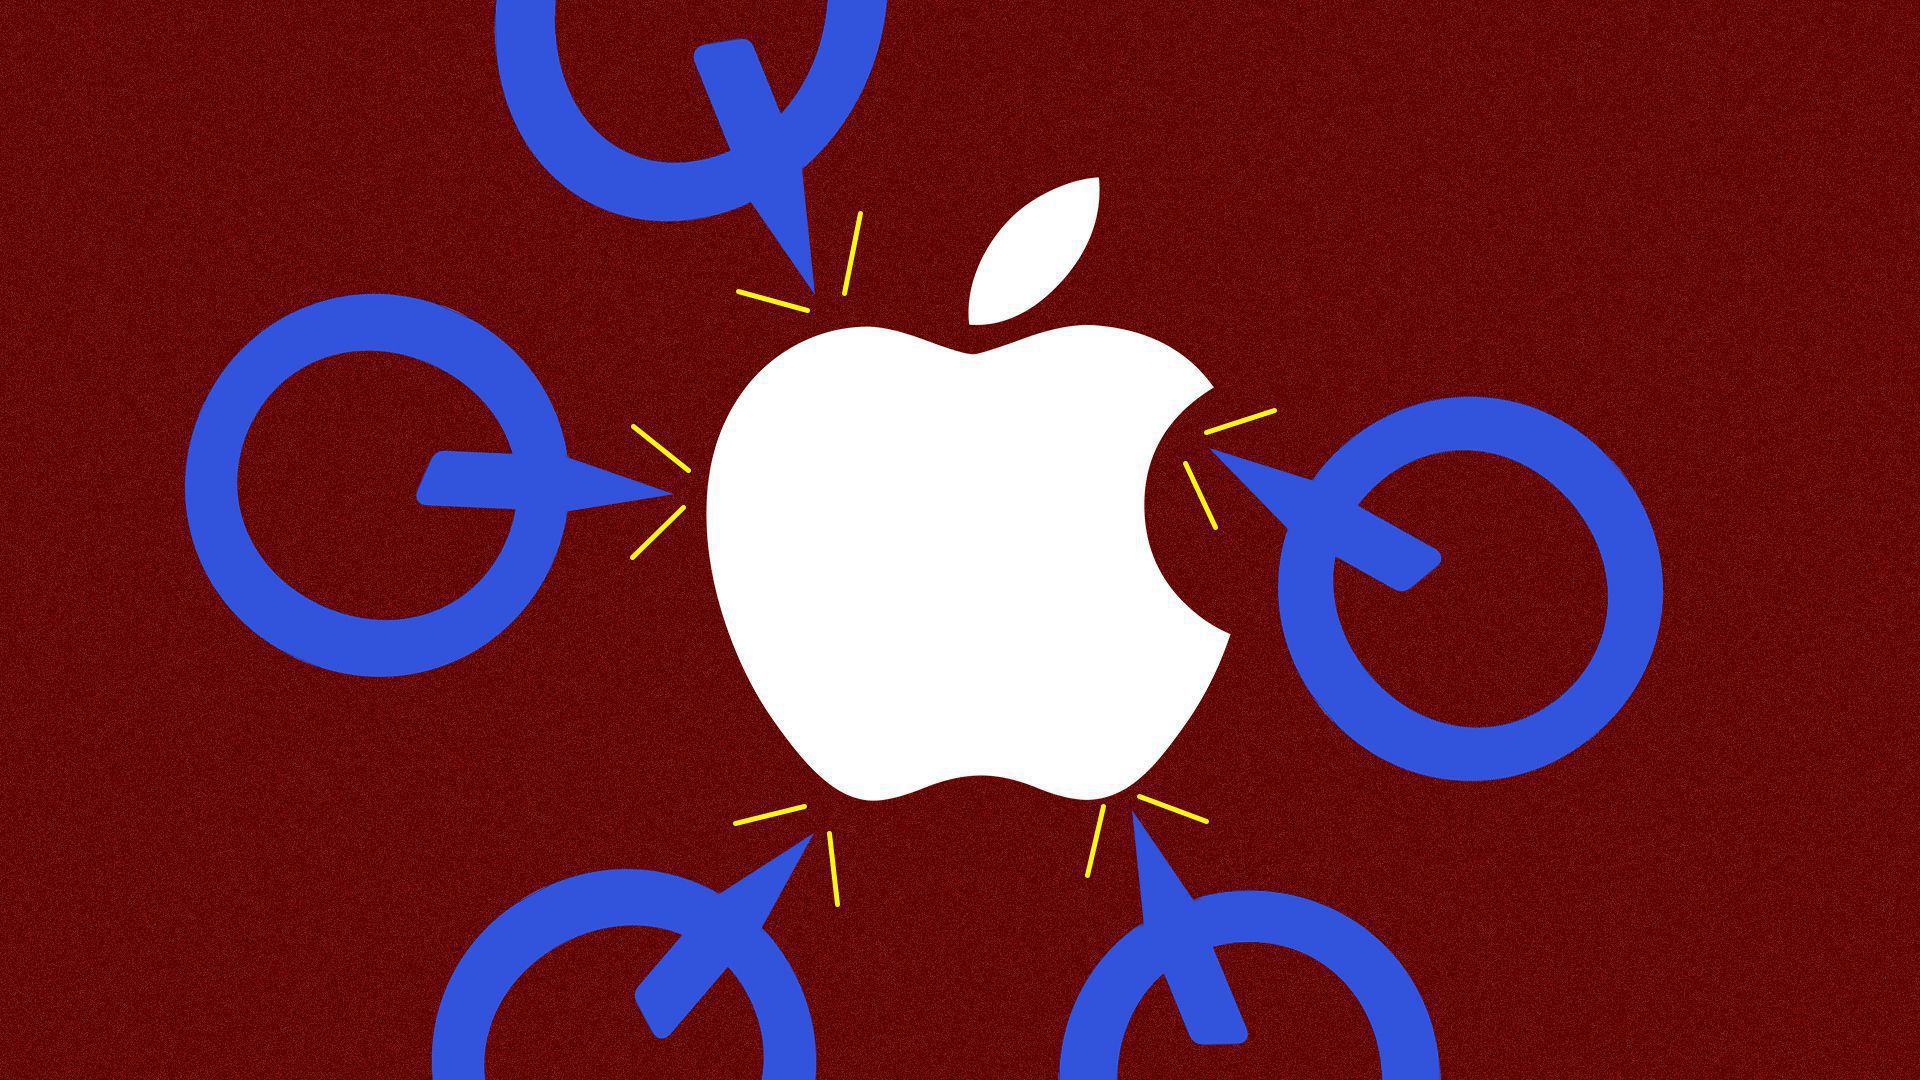 Qualcomm logo with arrows pointing at Apple logo